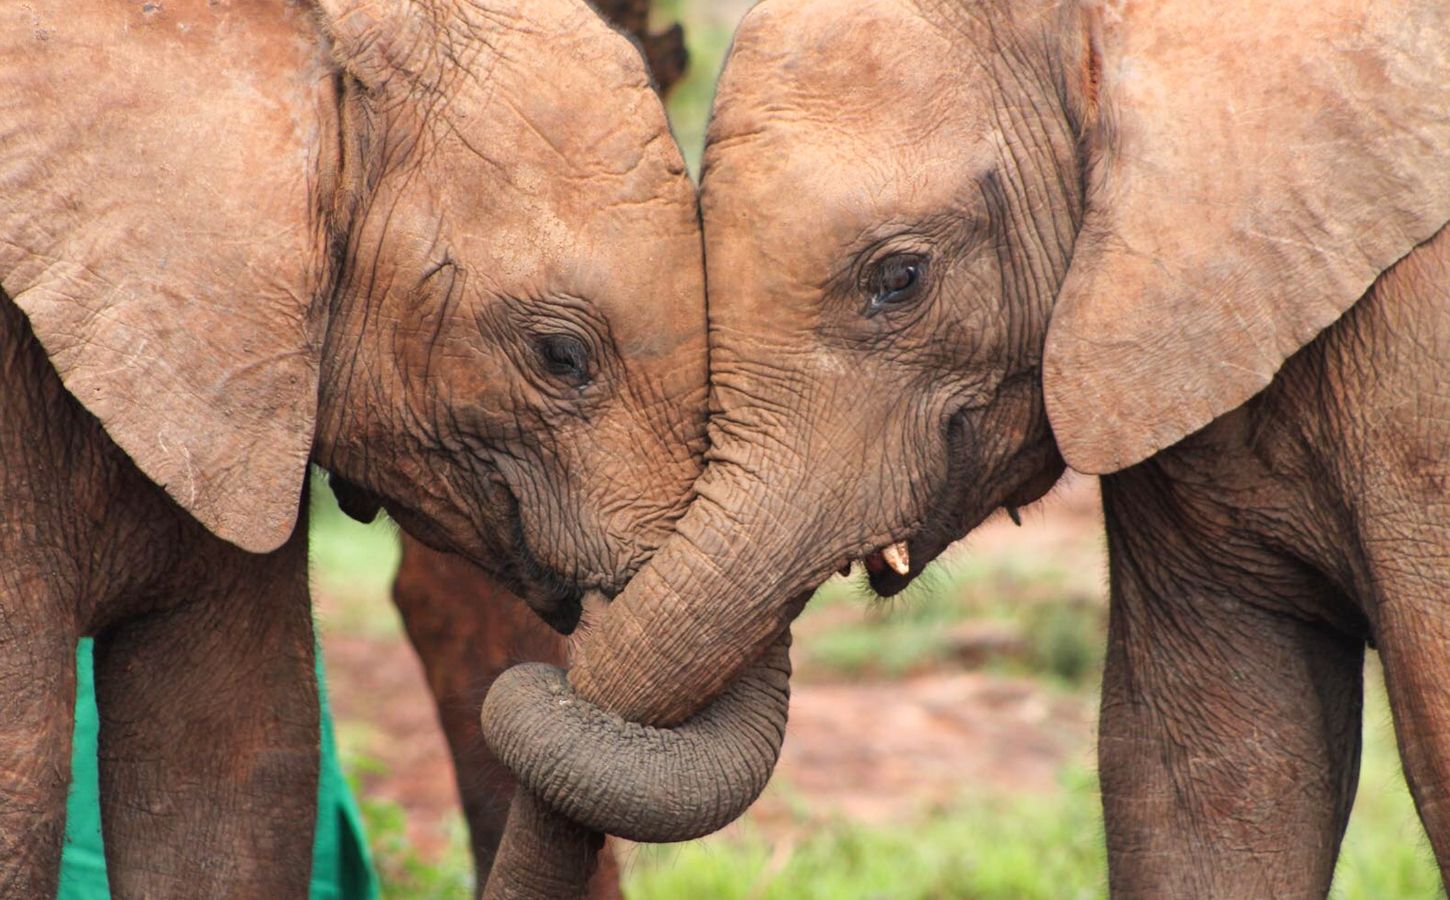 Two elephants, who are known to call each other by name, with their trunks intertwined